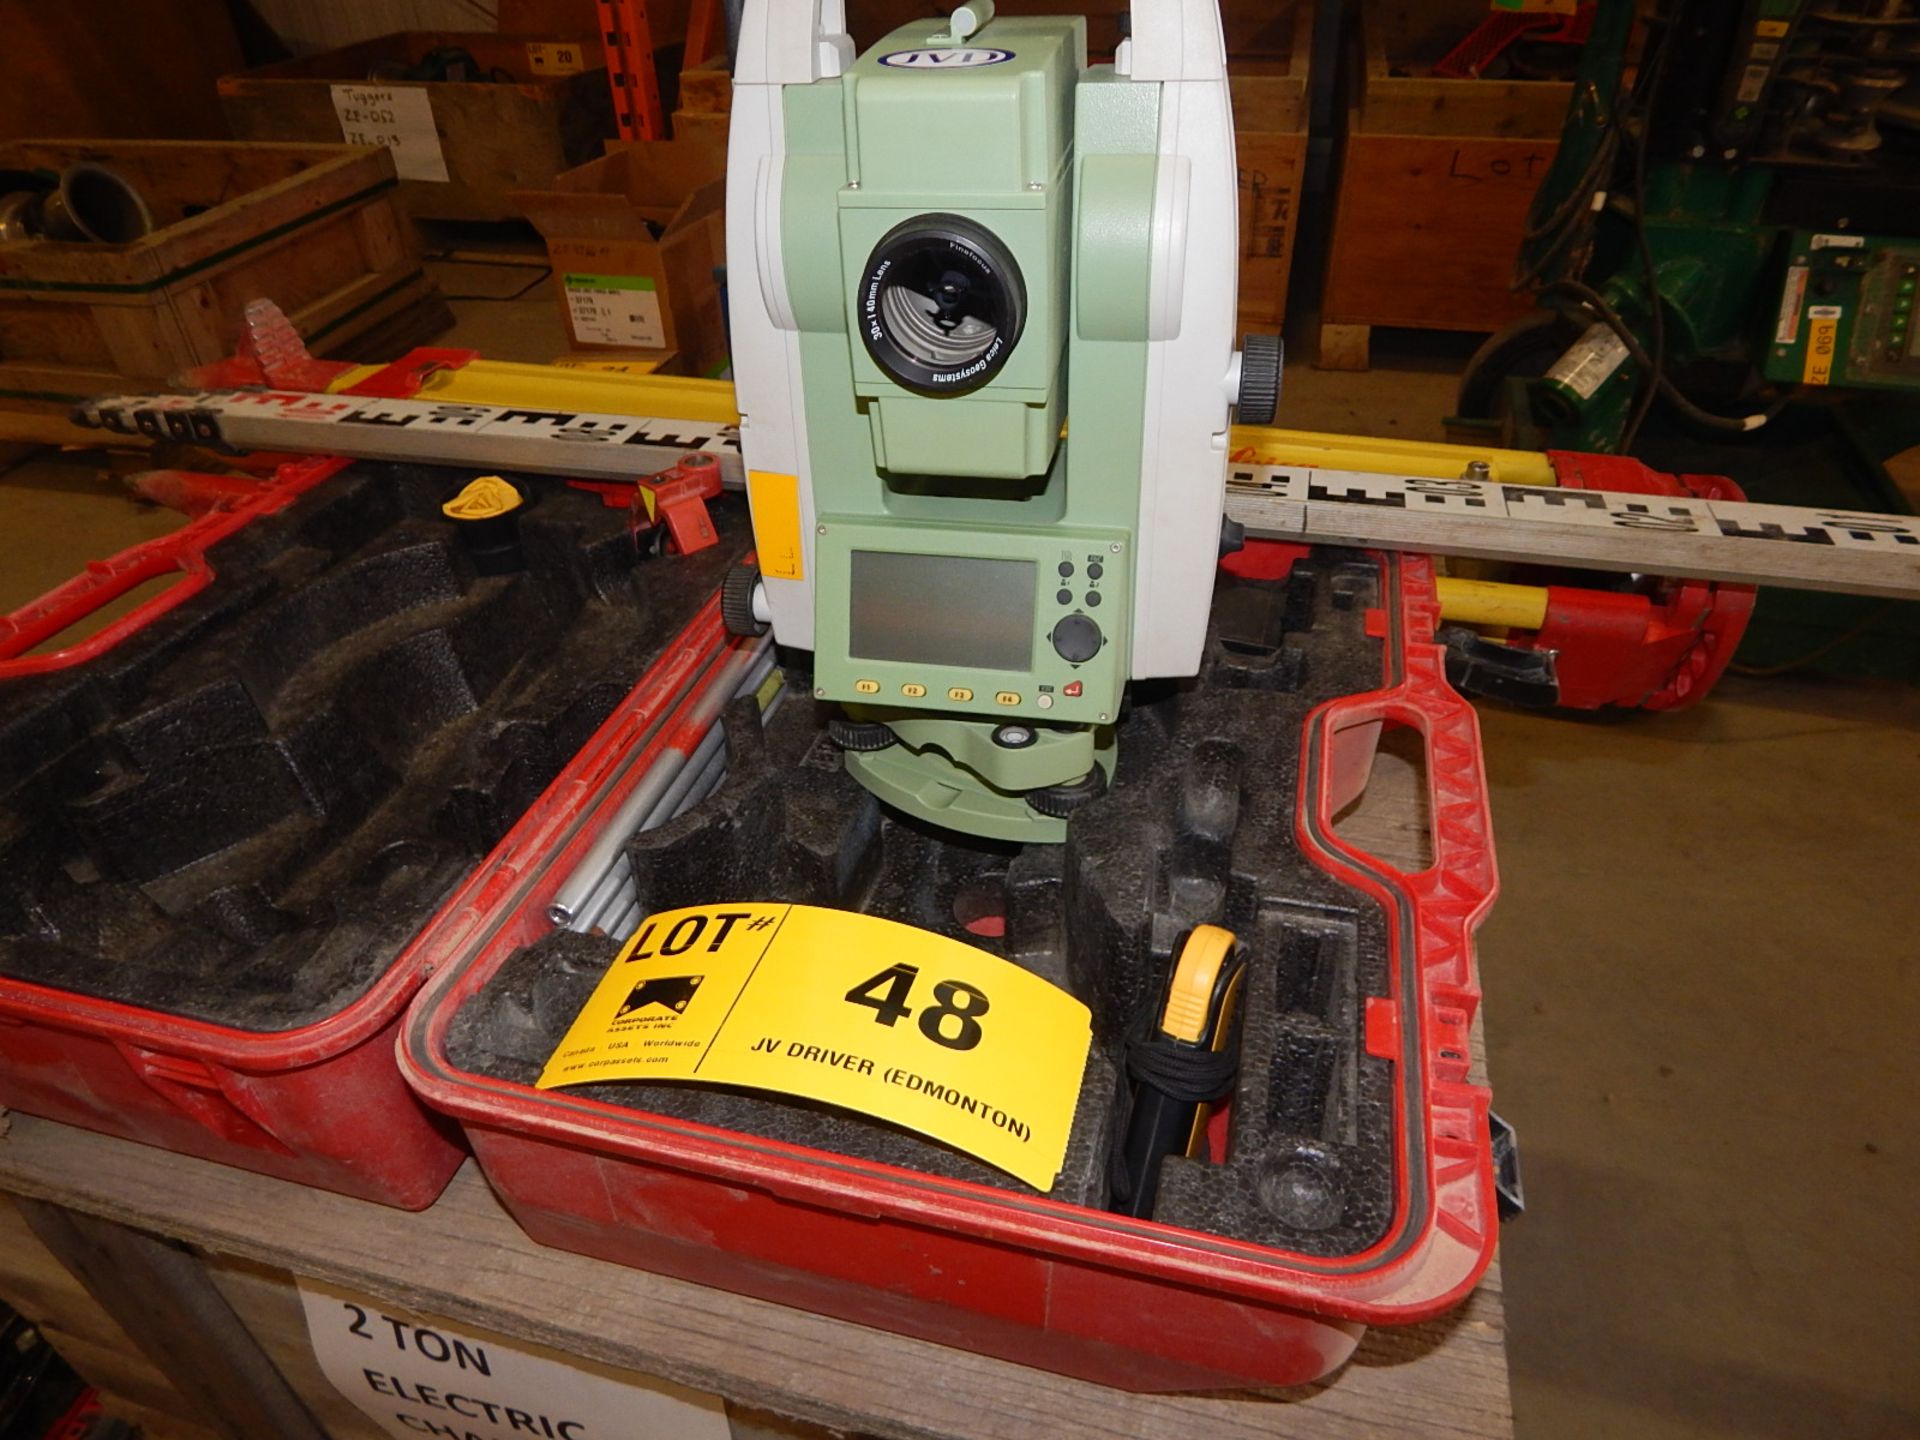 LOT/ LEICA TS02 BLUETOOTH COMPATIBLE TOTAL STATION WITH DIGITAL DISPLAY, TRIPOD AND GRADING STICK - Image 4 of 6